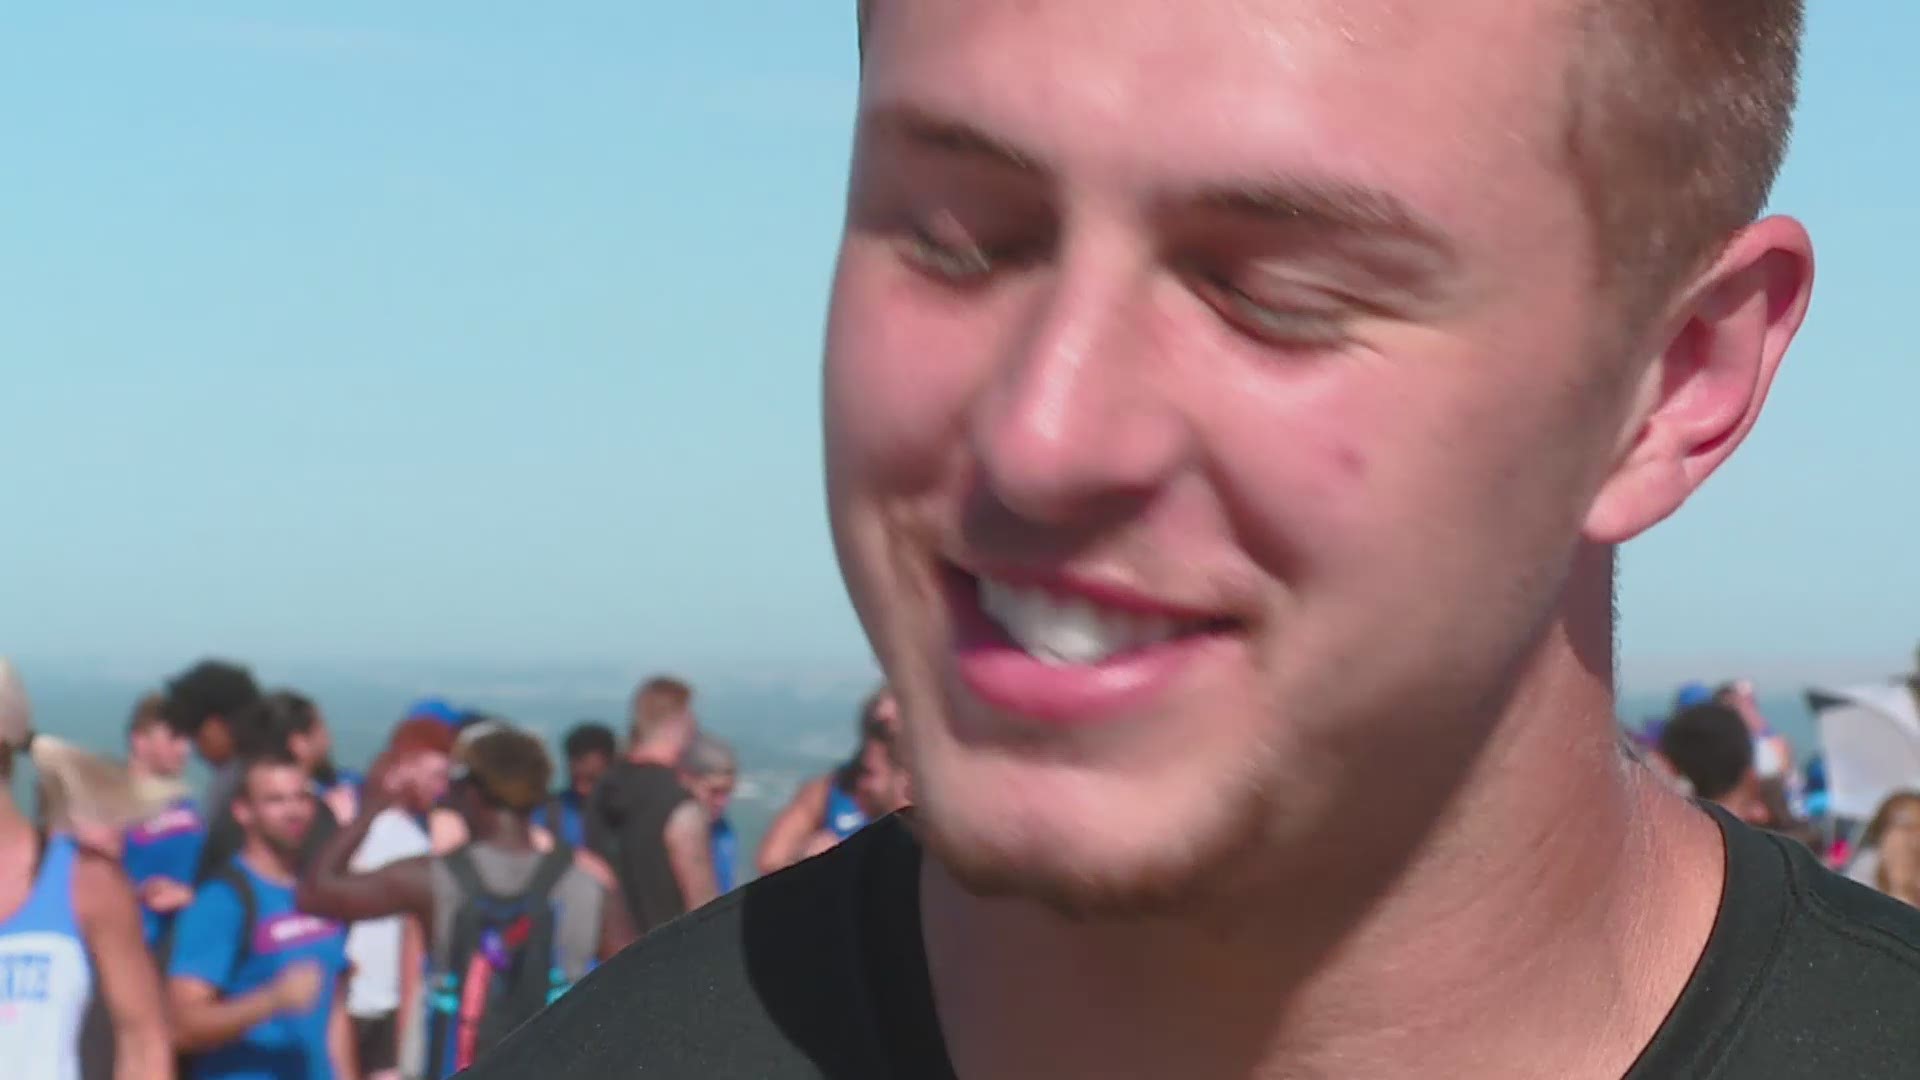 After reaching the top of Table Rock, which sits nearly 2,000 feet above Boise, senior Garrett Collingham reflected on what comes next now that fall camp is officially over.